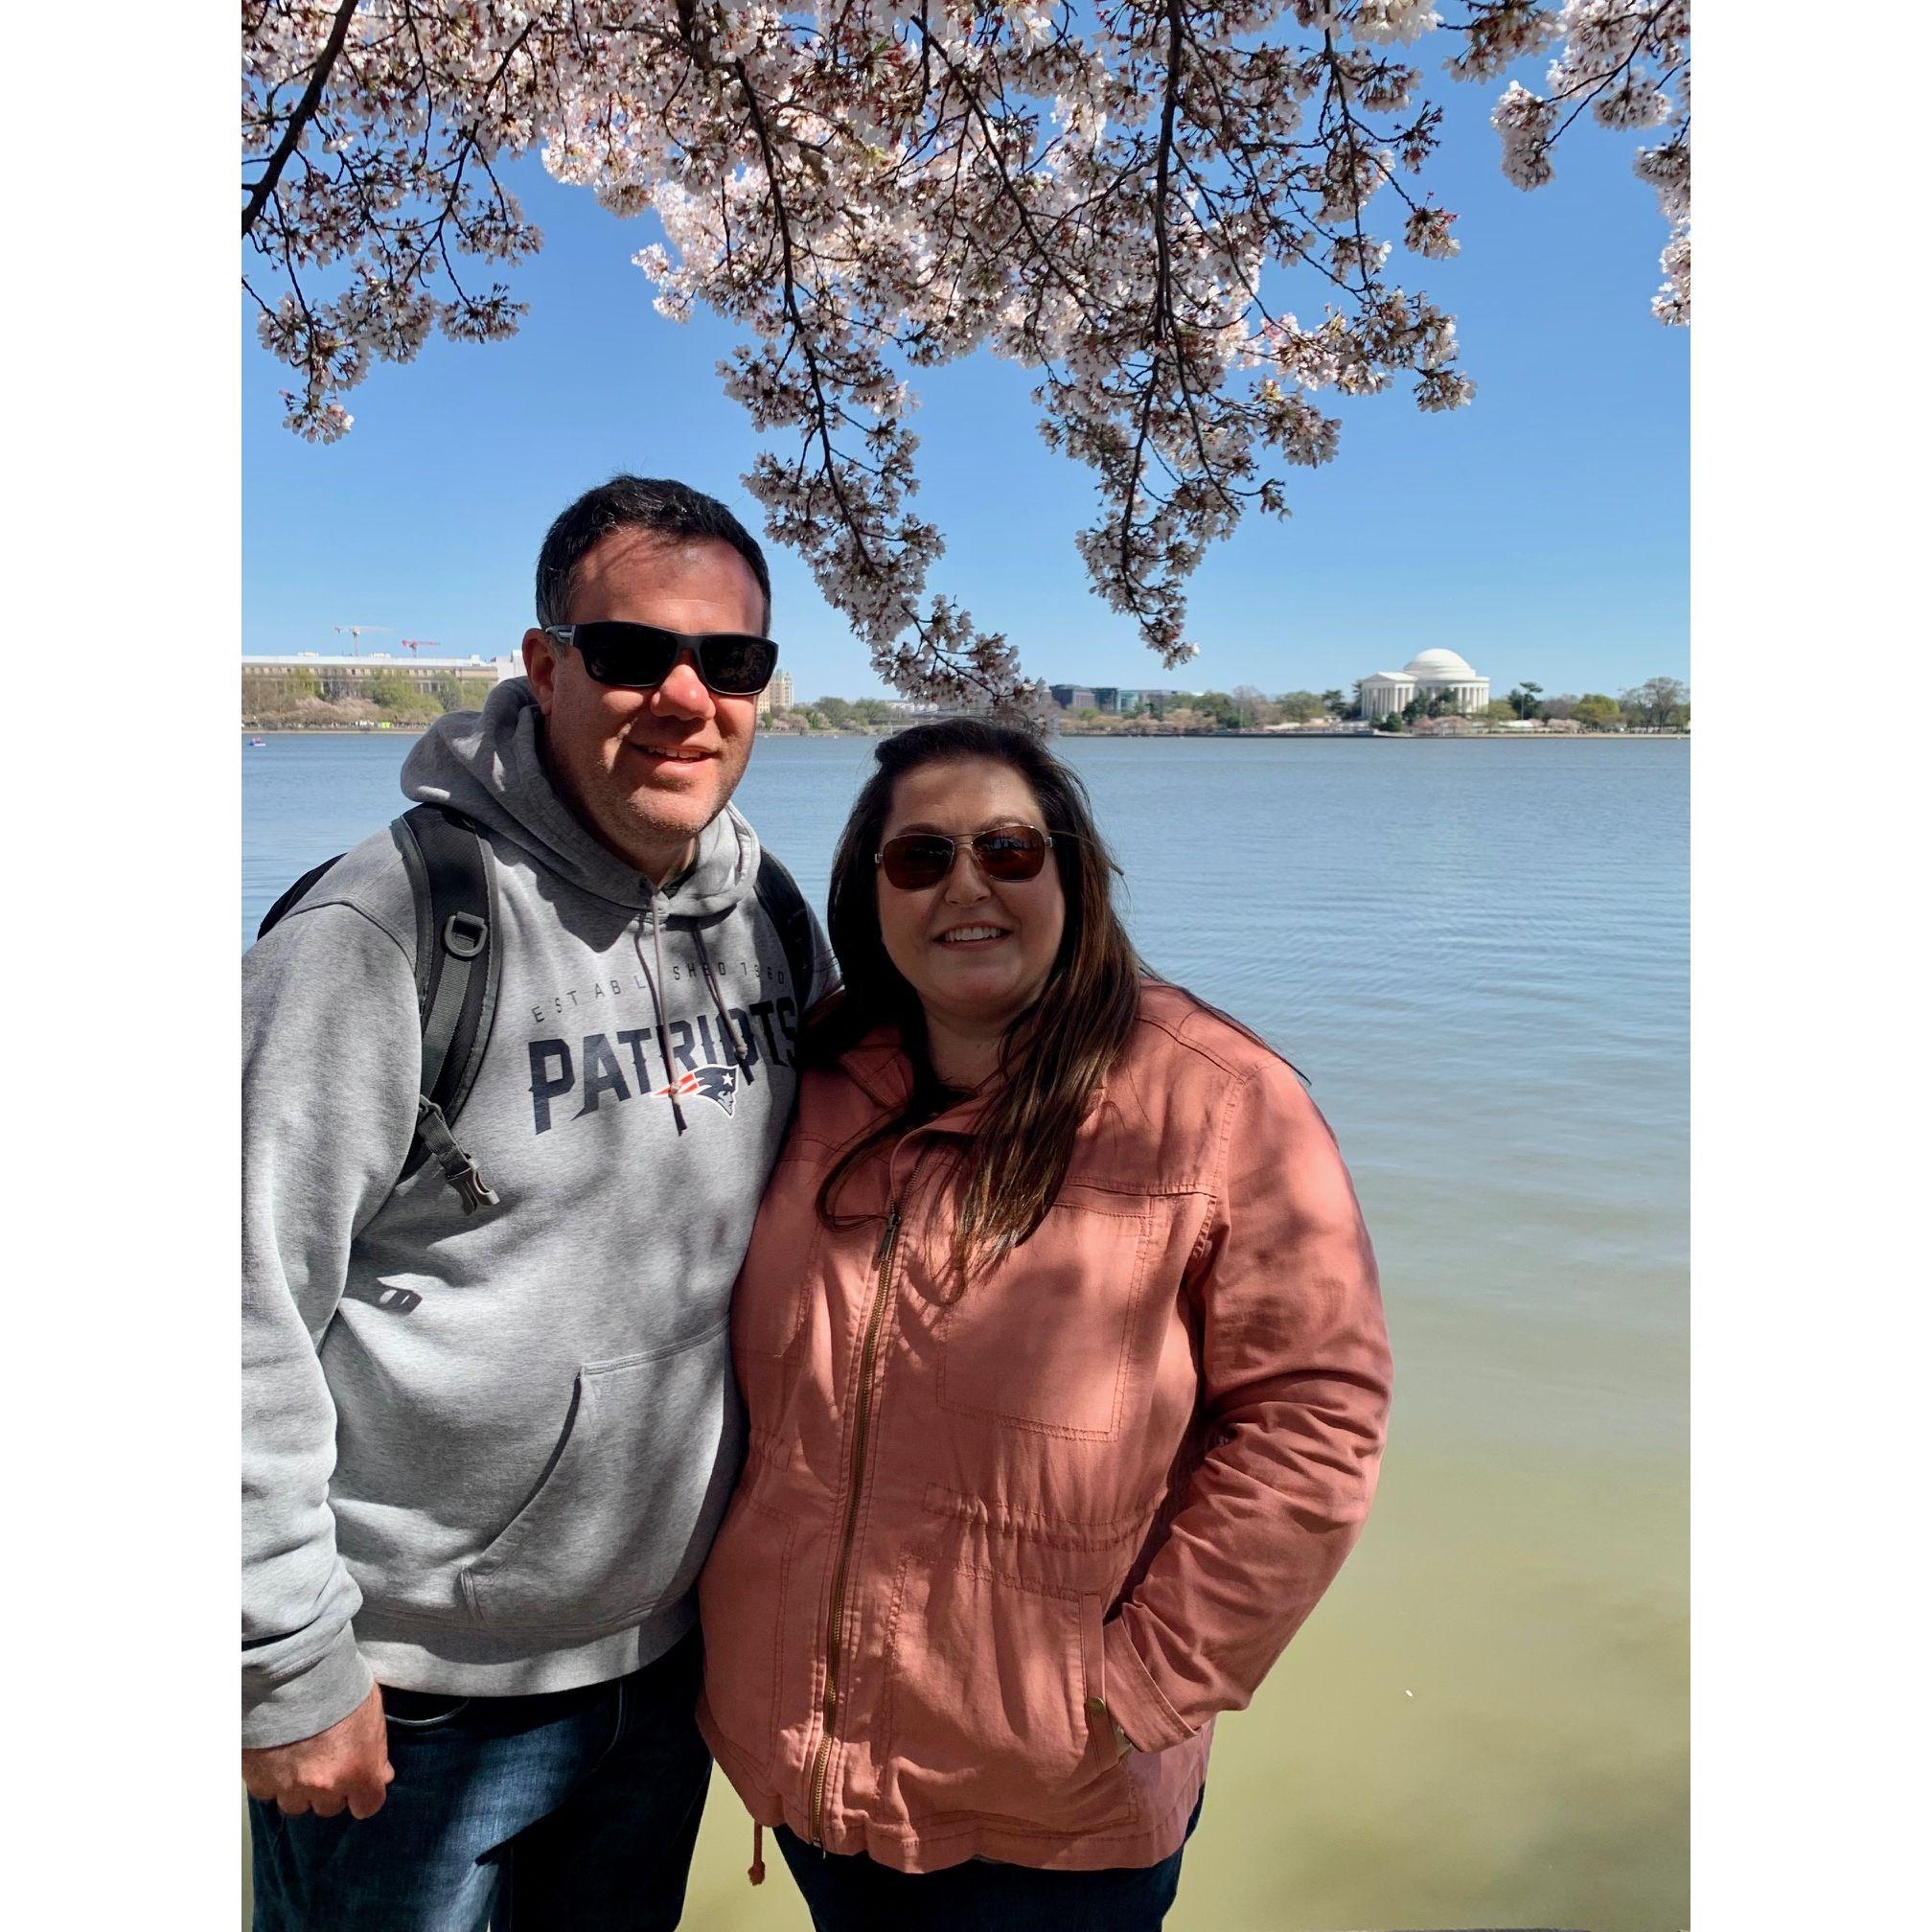 Diana's Bucklist: Seeing the Cherry Blossoms in Washington D. C. (March 2023)